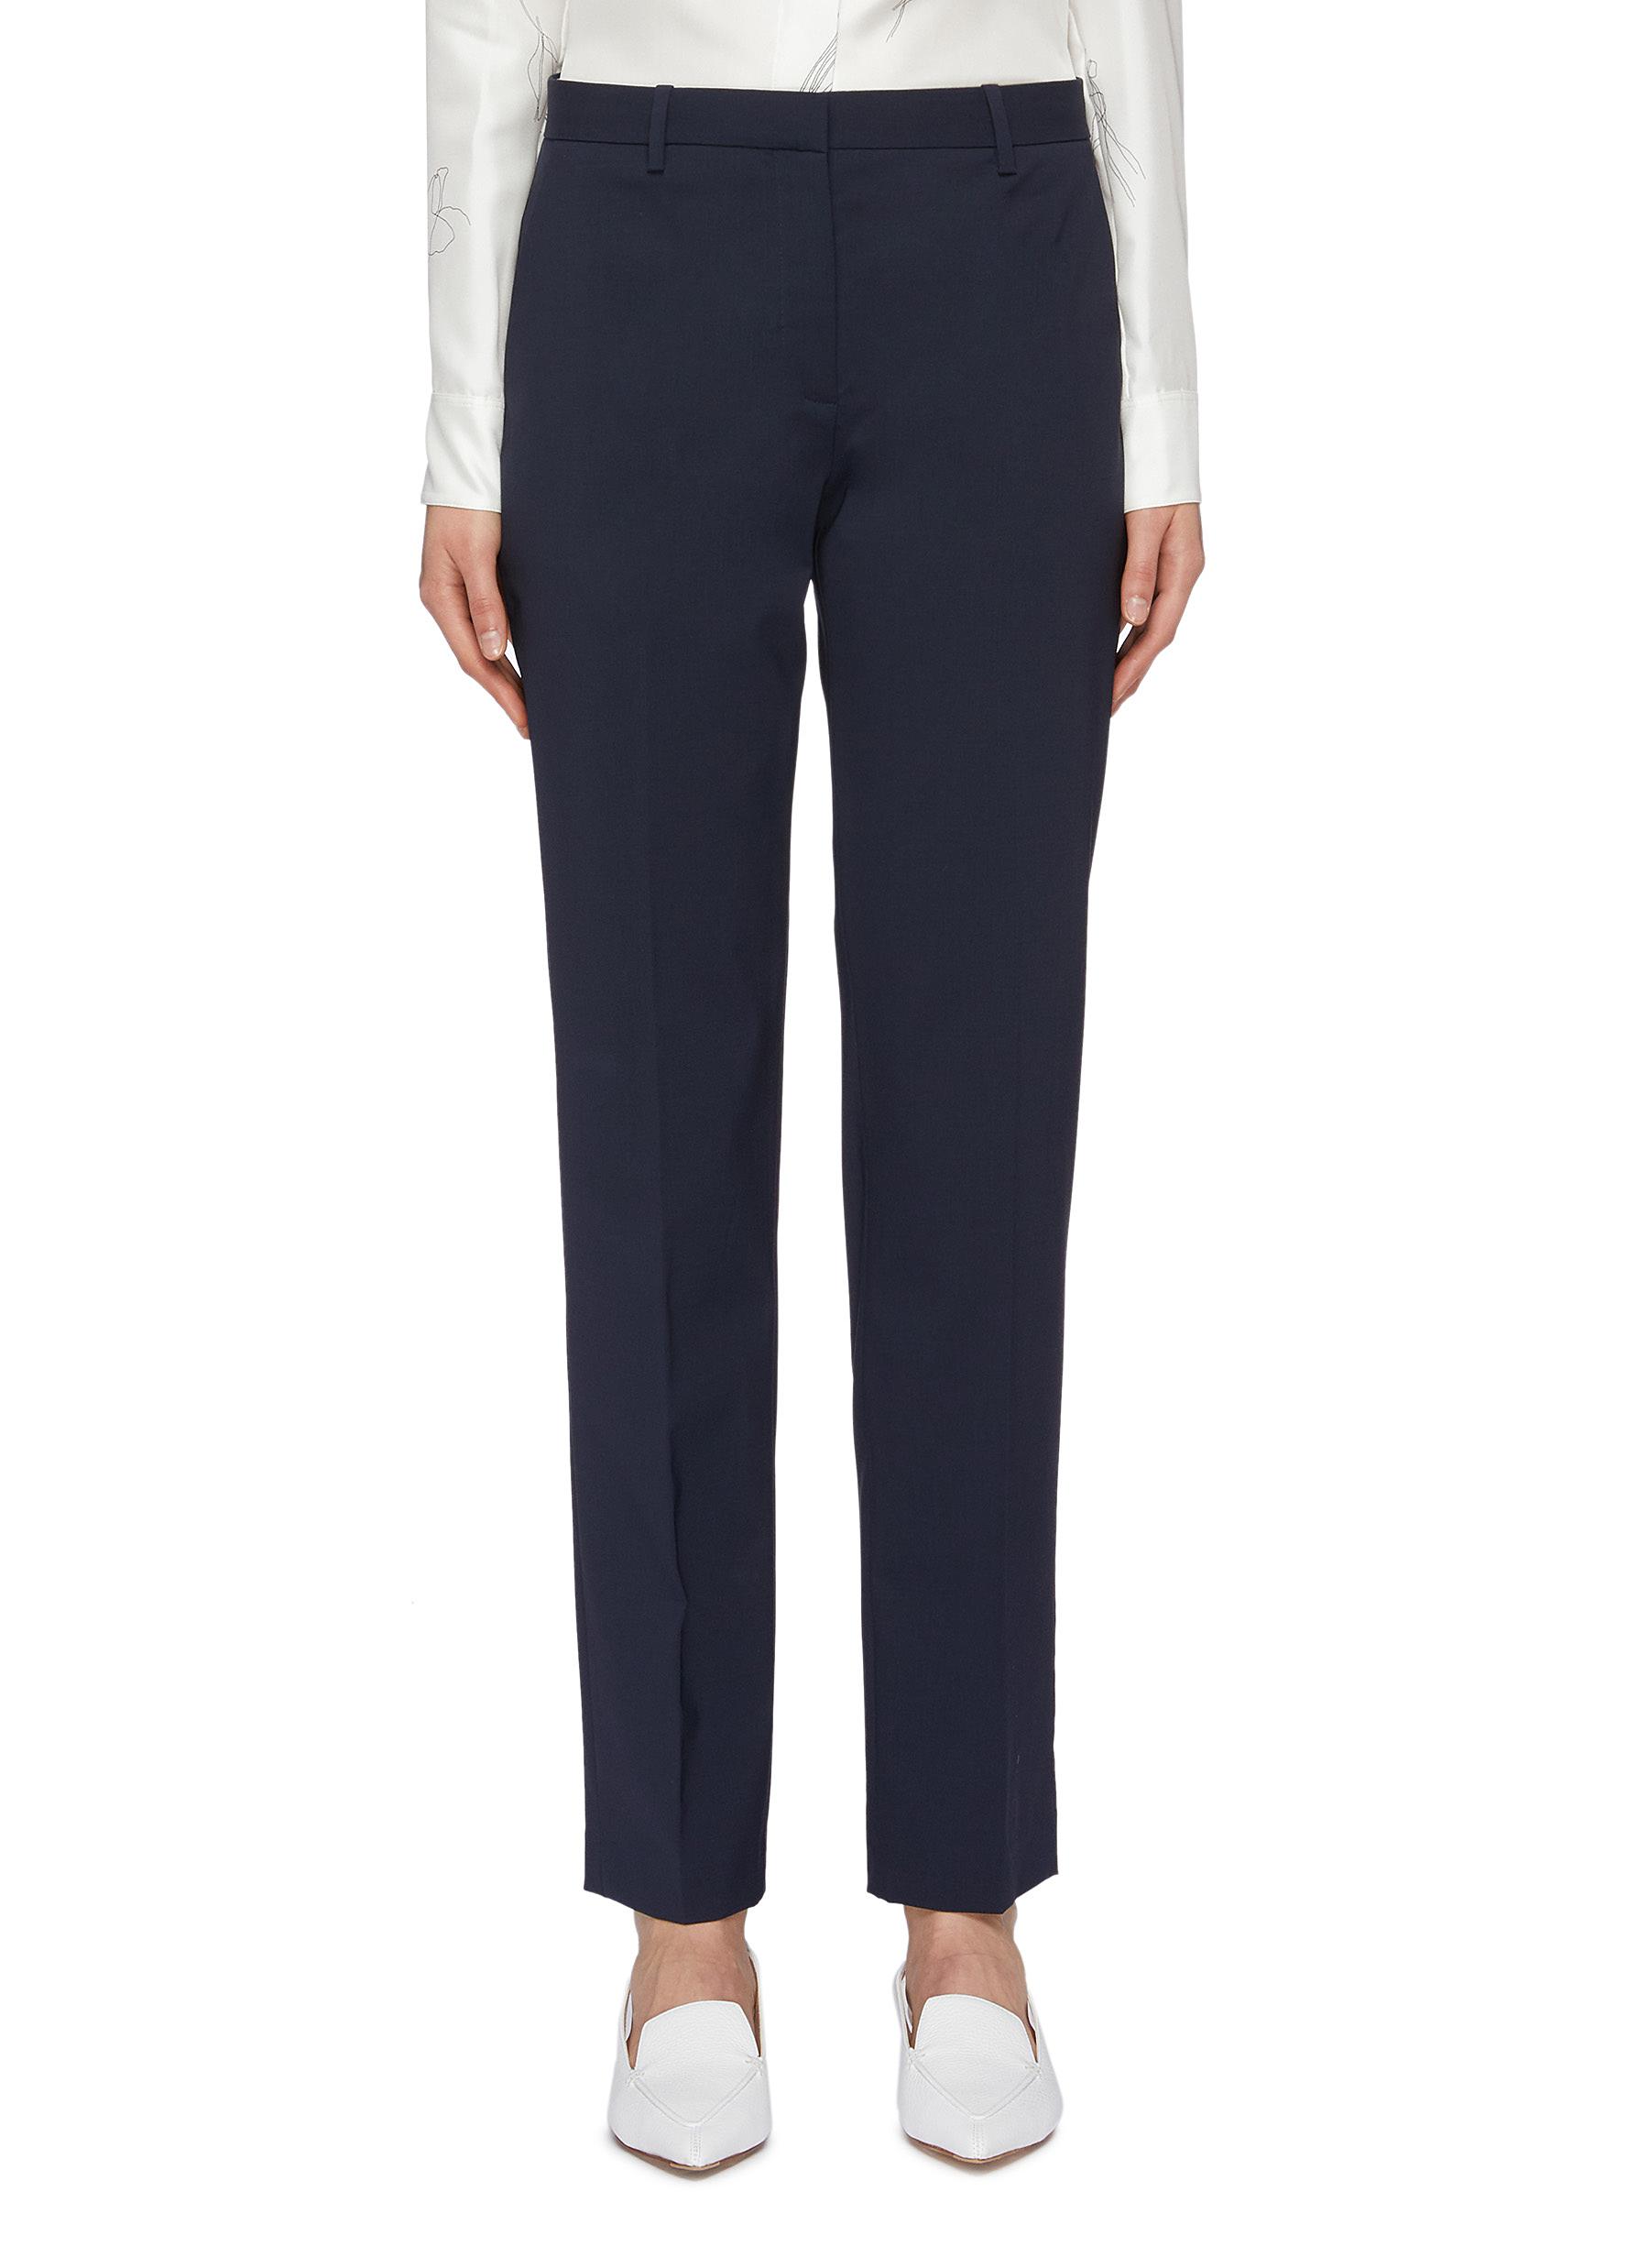 Slim-fit pants by Theory